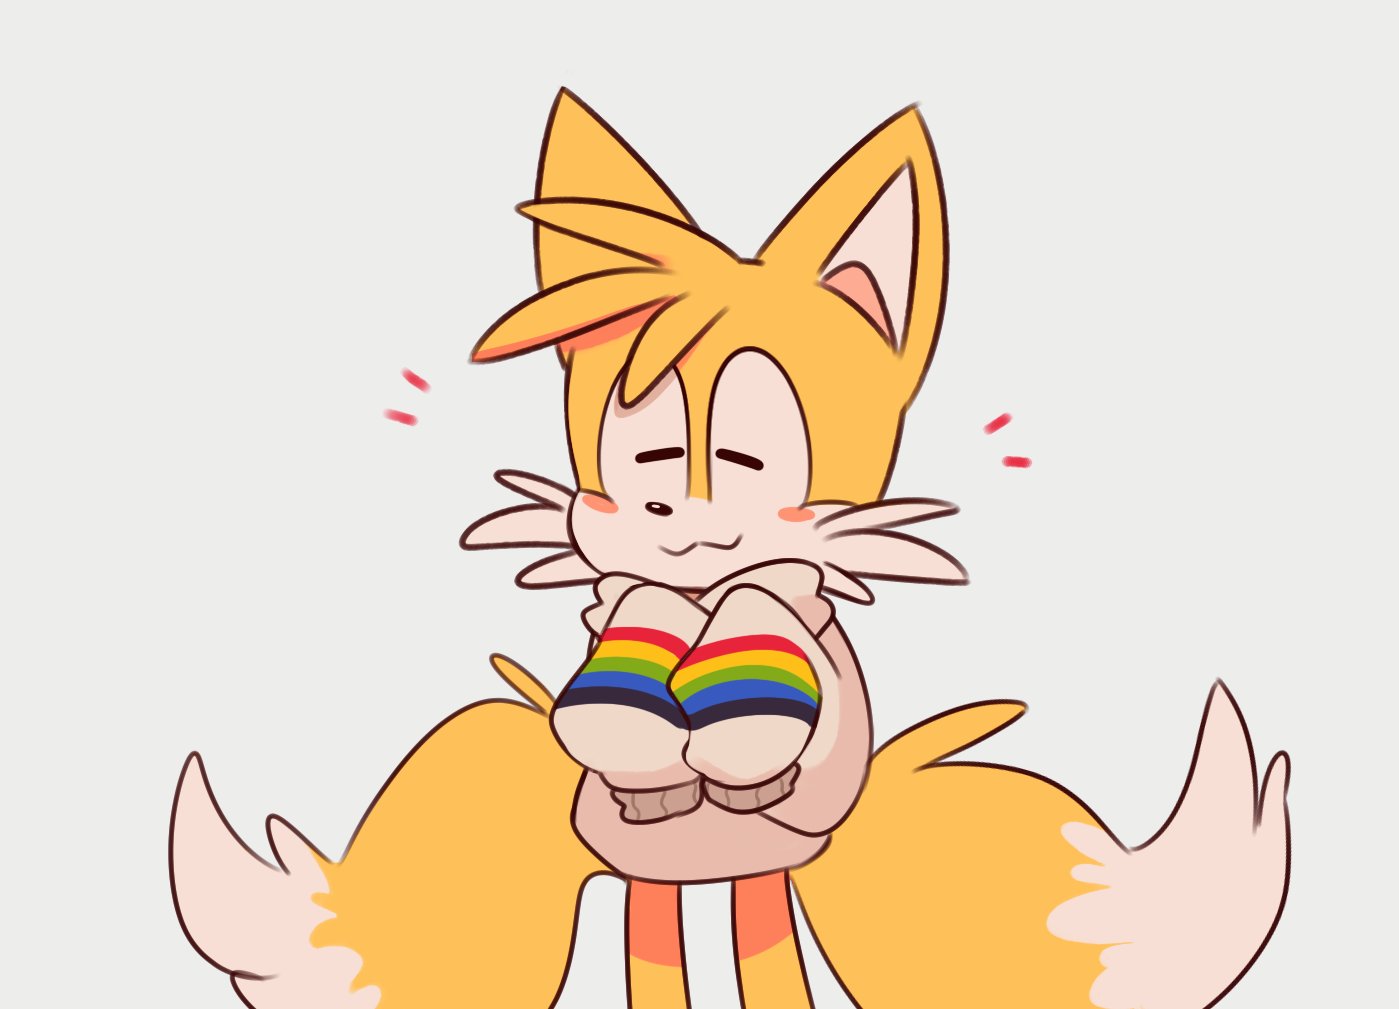 “he loves the jacket @Ayleen_Seraph gave him!🌈 #tails” .